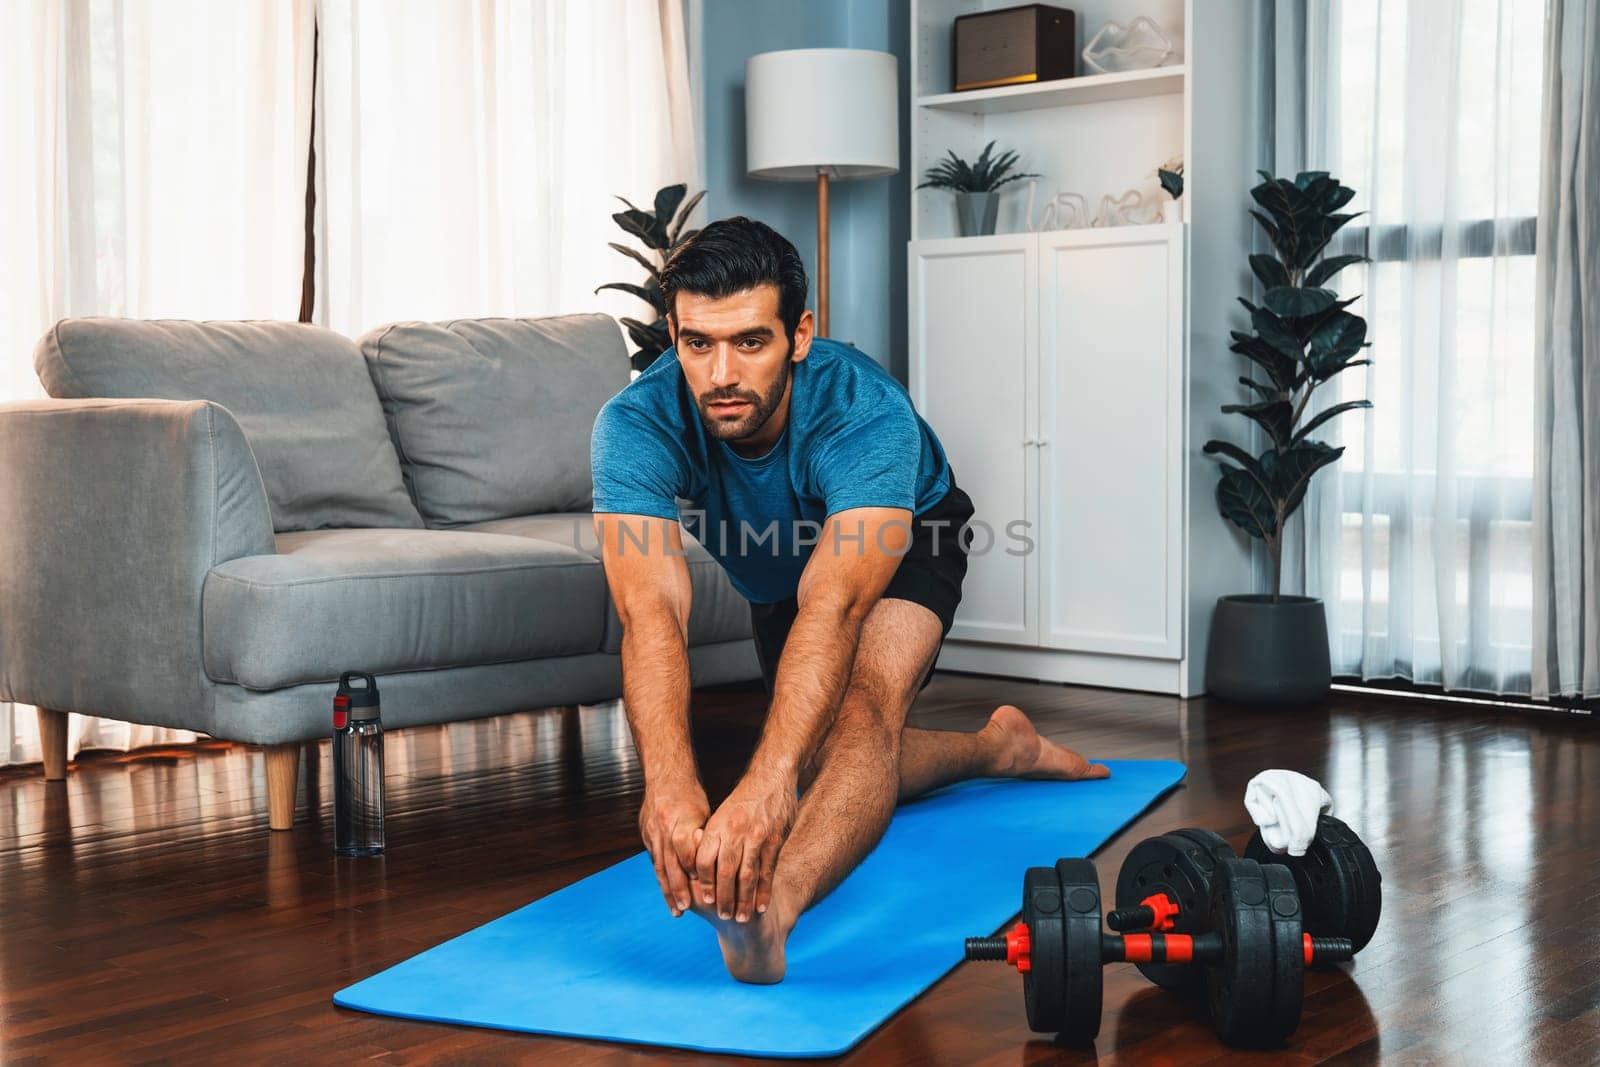 Athletic and sporty man doing warmup and stretching before home body workout exercise session for fit physique and healthy sport lifestyle at home. Gaiety home exercise workout training concept.